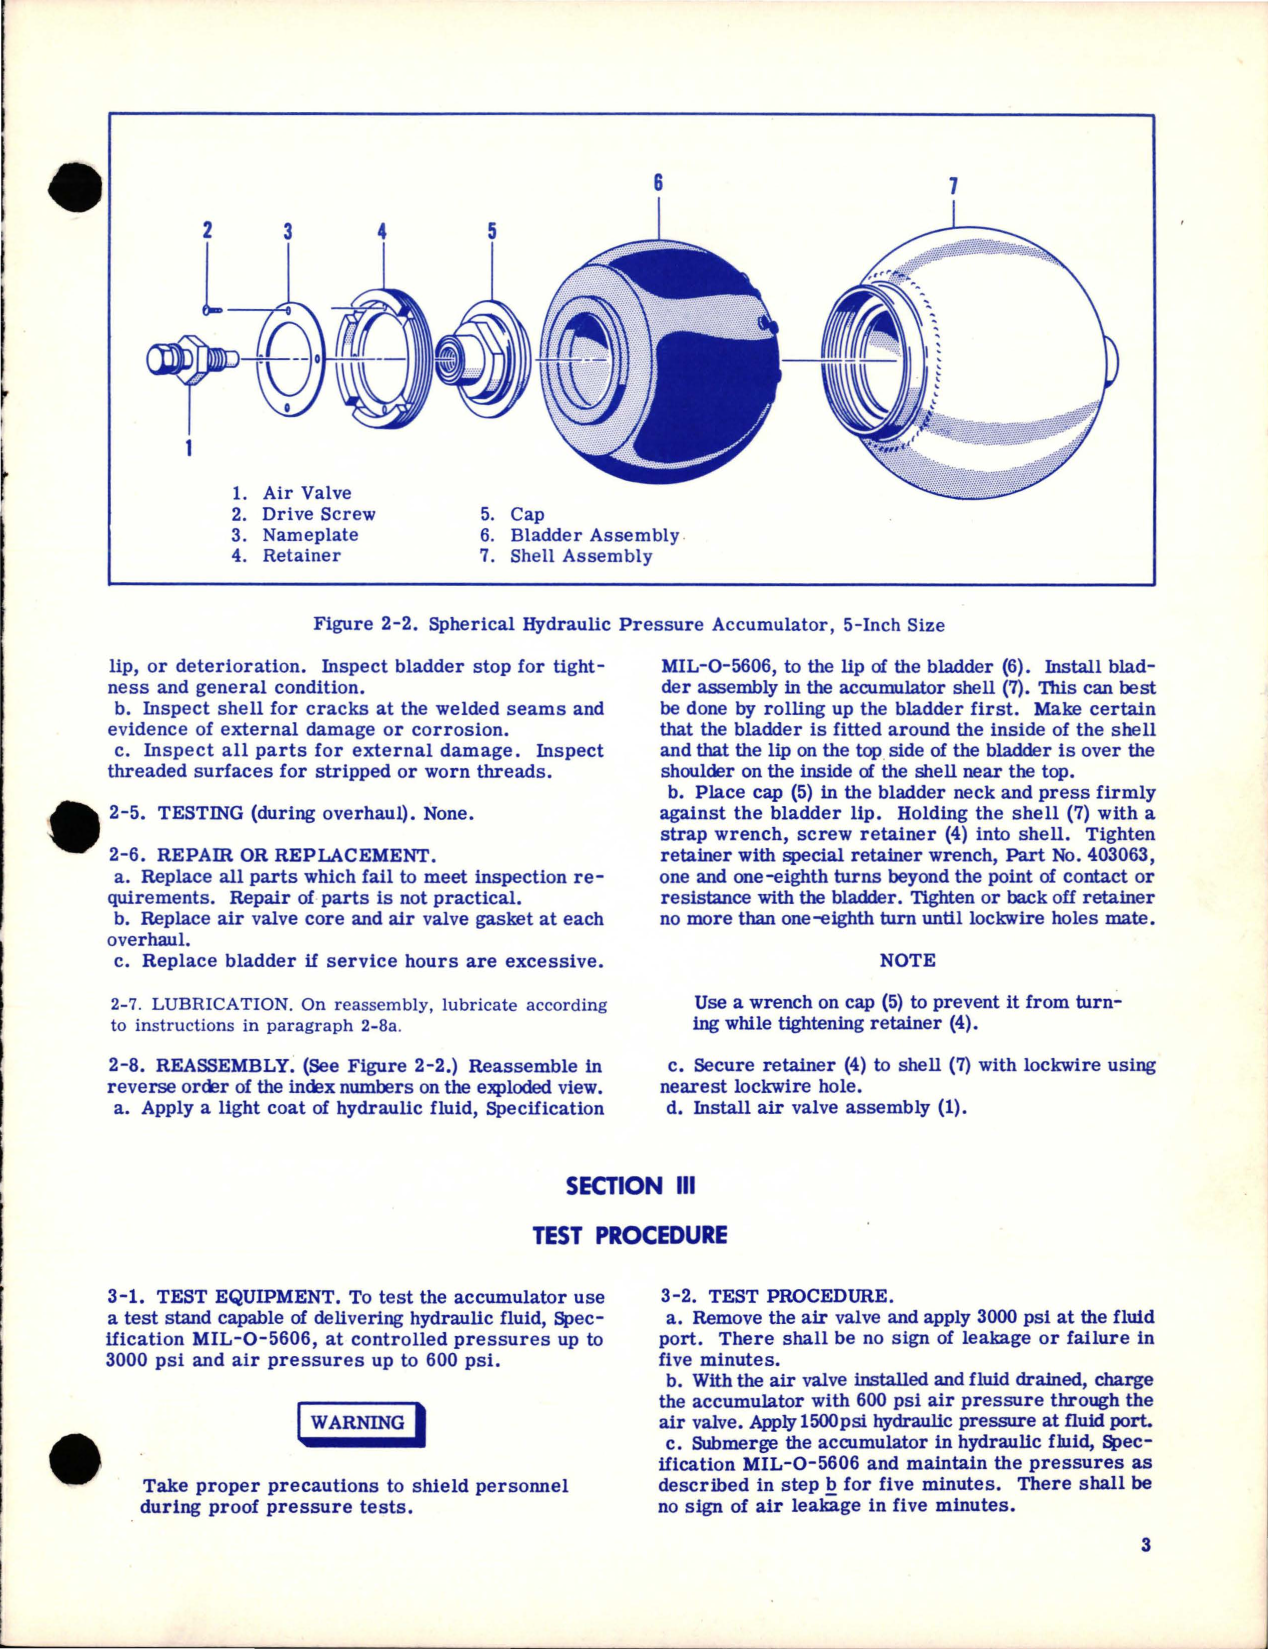 Sample page 5 from AirCorps Library document: Service Manual for Spherical Hydraulic Pressure Accumulators - 1500 PSI 